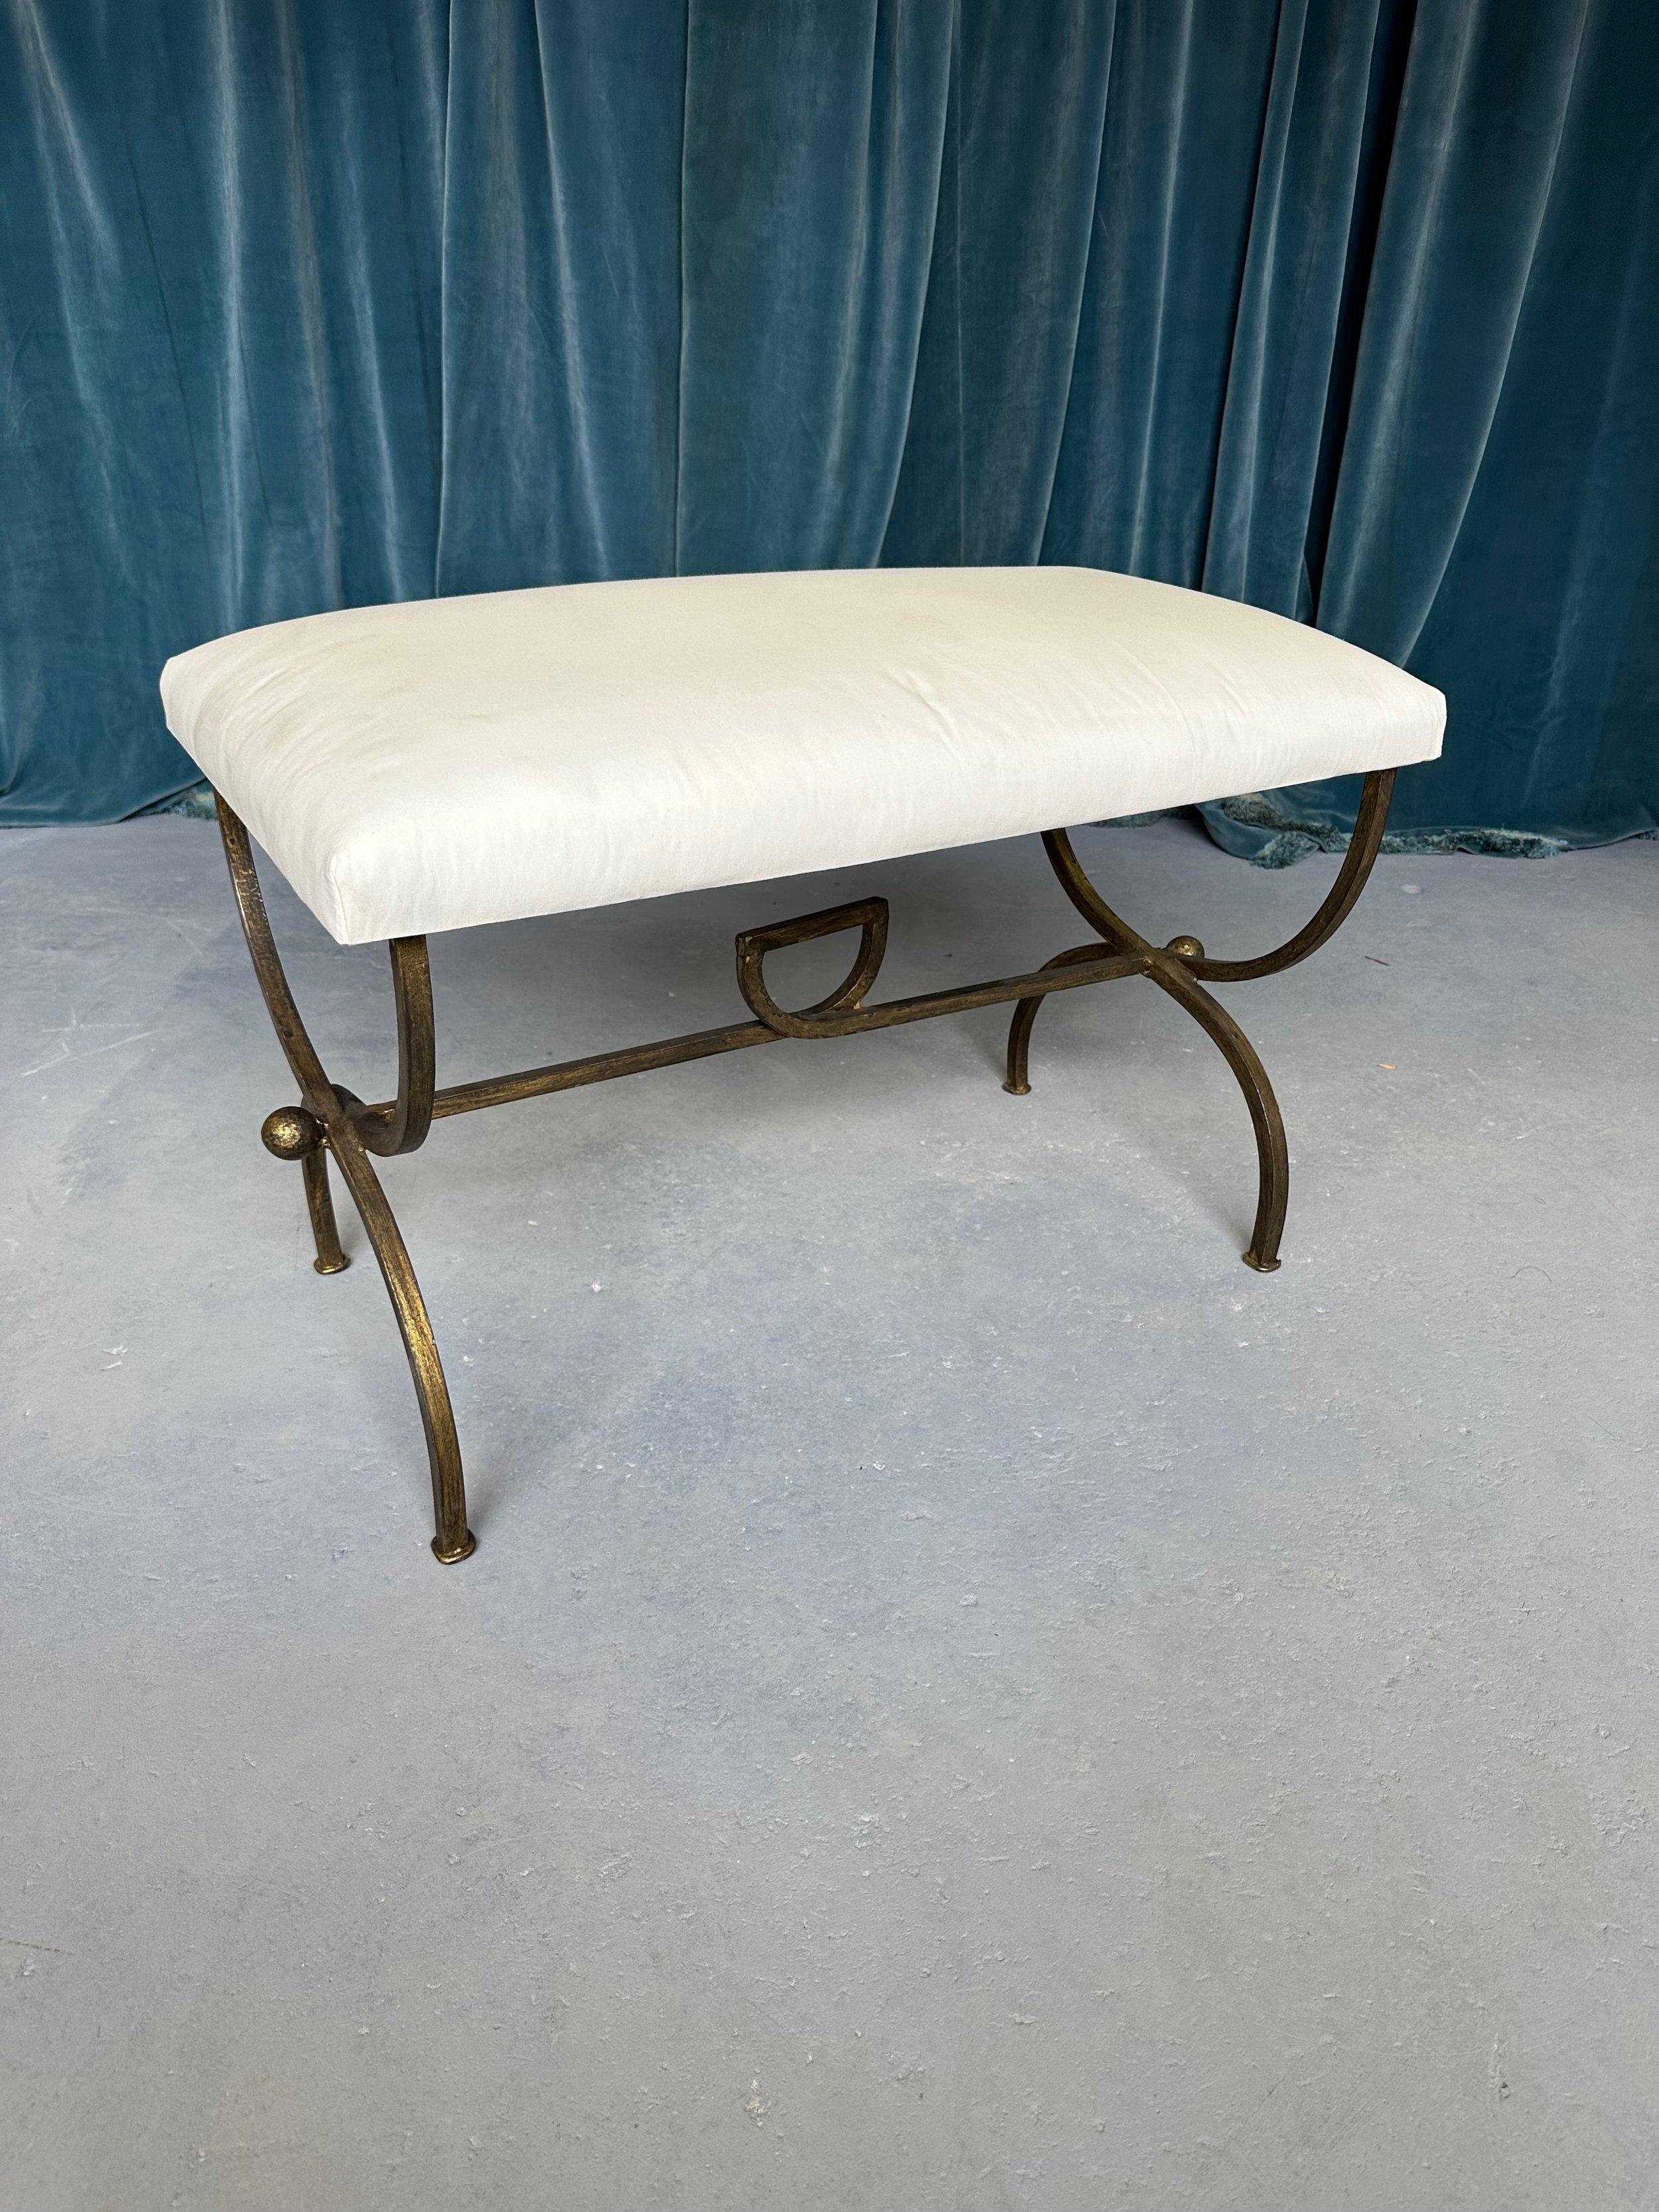 Pair of Gilt Iron Benches in Muslin In Good Condition For Sale In Buchanan, NY